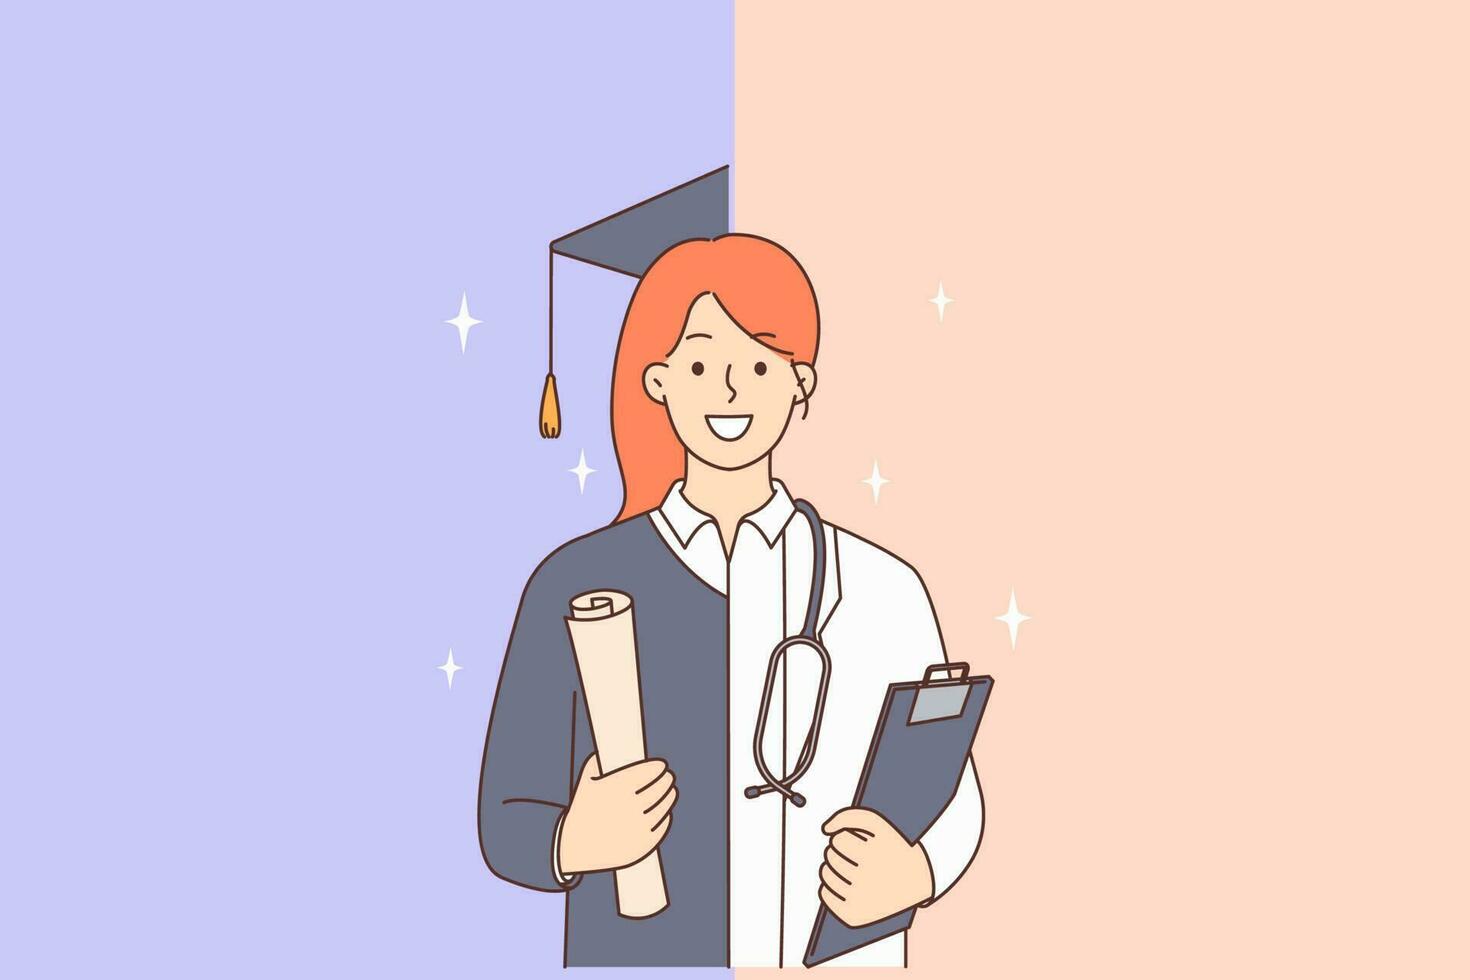 Smiling female college graduate and successful doctor. Happy motivated university student and medical professional. Education and work balance. Vector illustration.